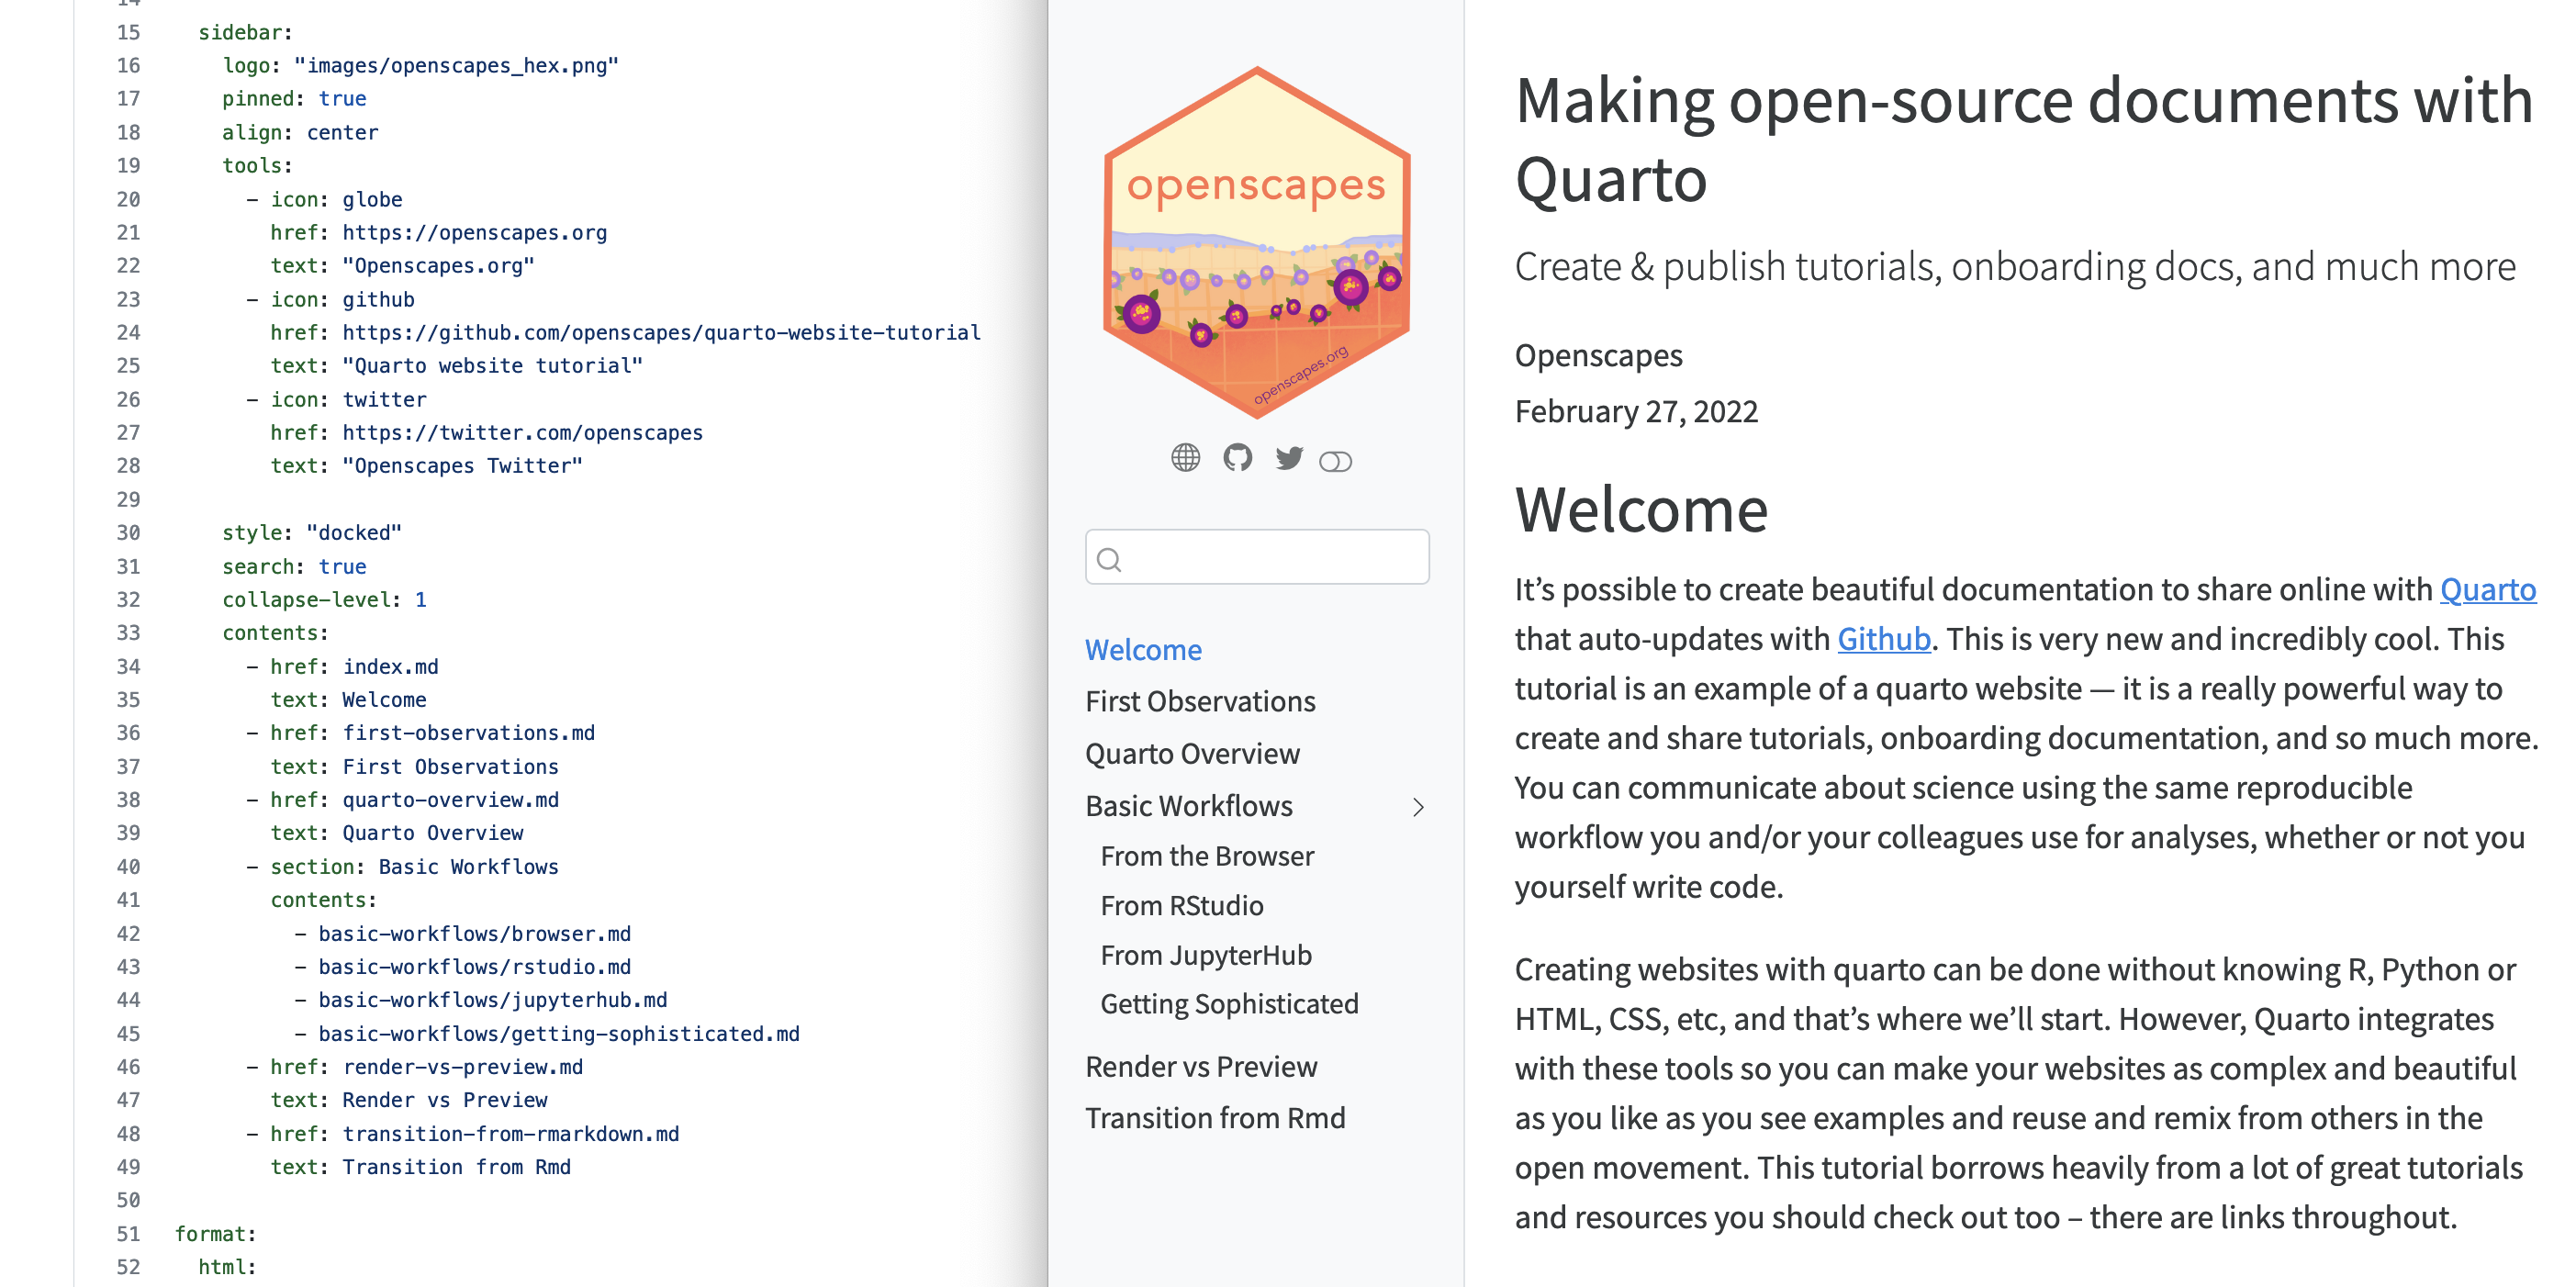 _quarto.yml and website side-by-side